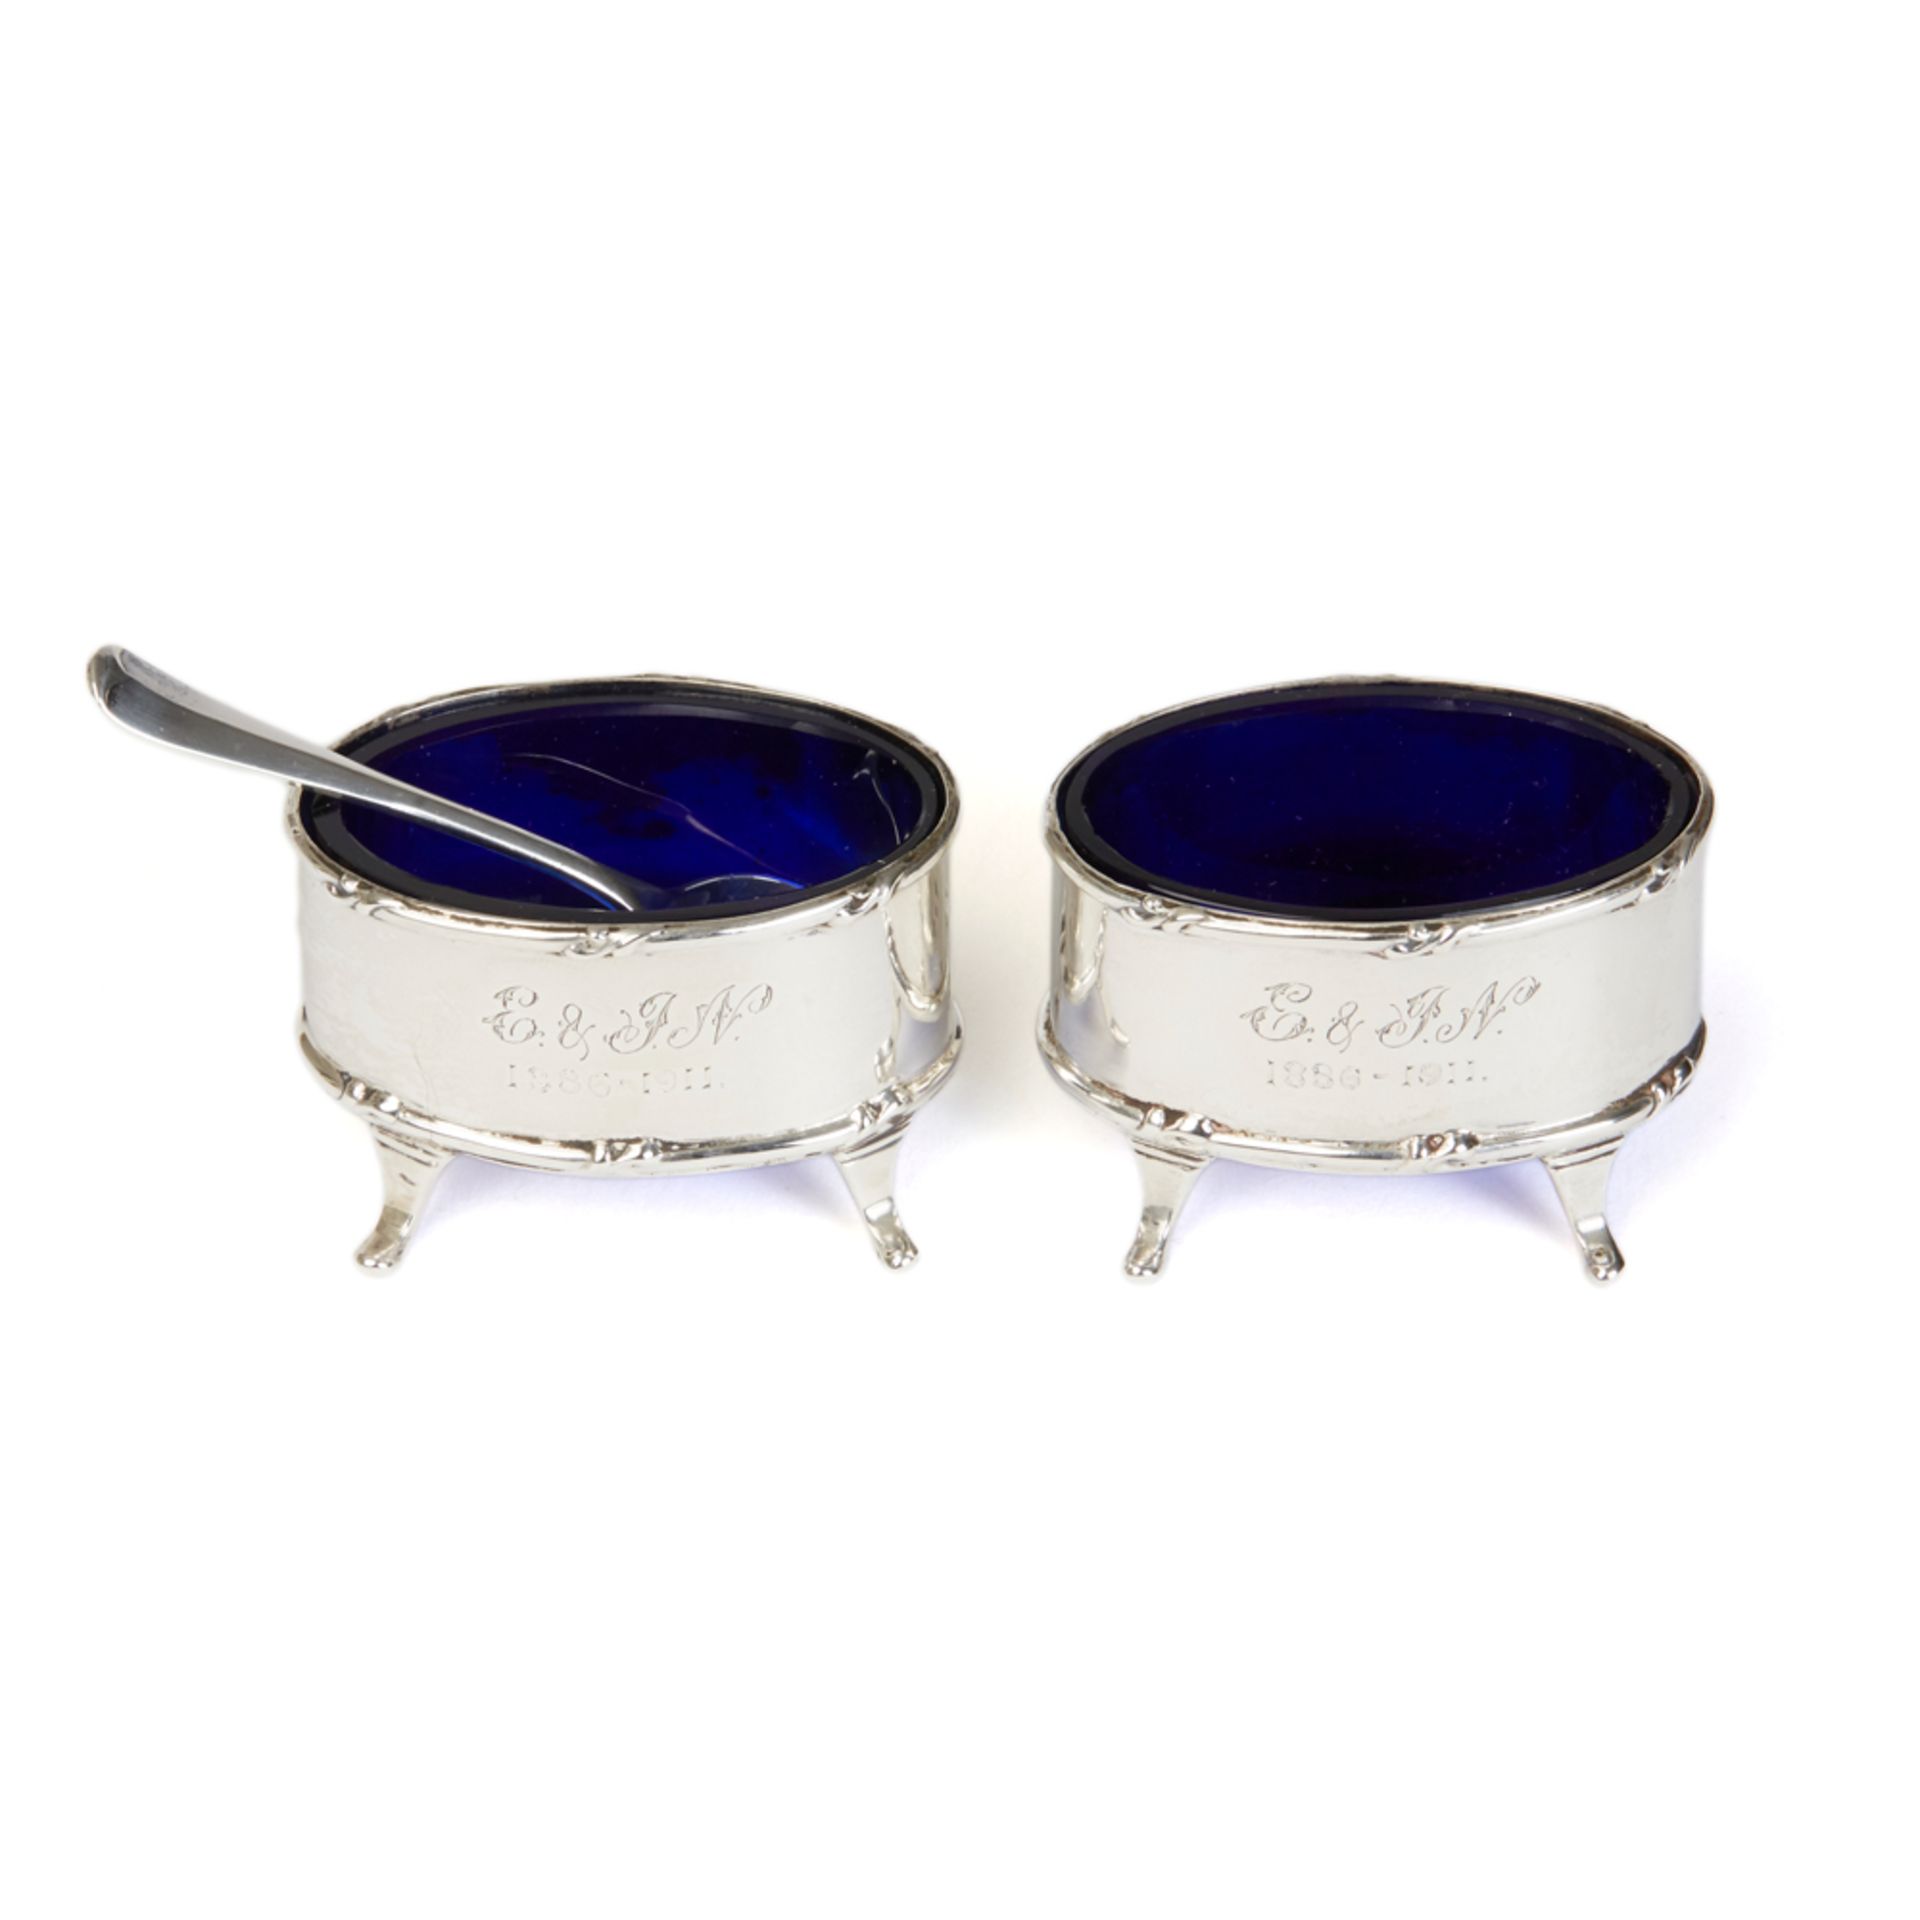 Pair Antique Silver & Blue Glass Salts Chester 1909 - Image 3 of 12